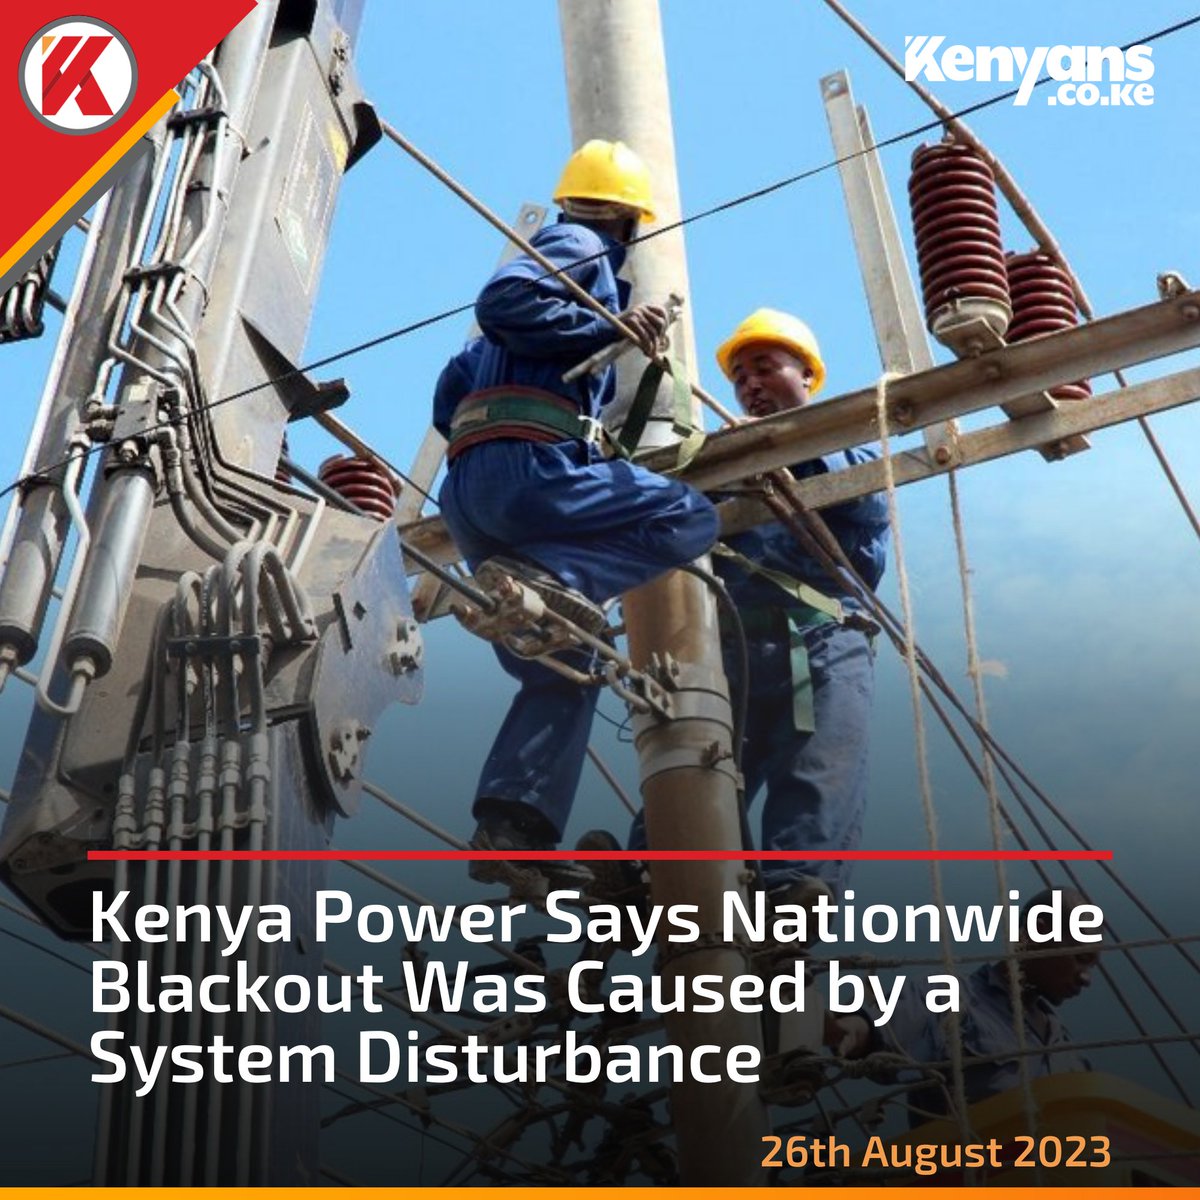 Kenya Power says the nationwide blackout was caused by a system disturbance